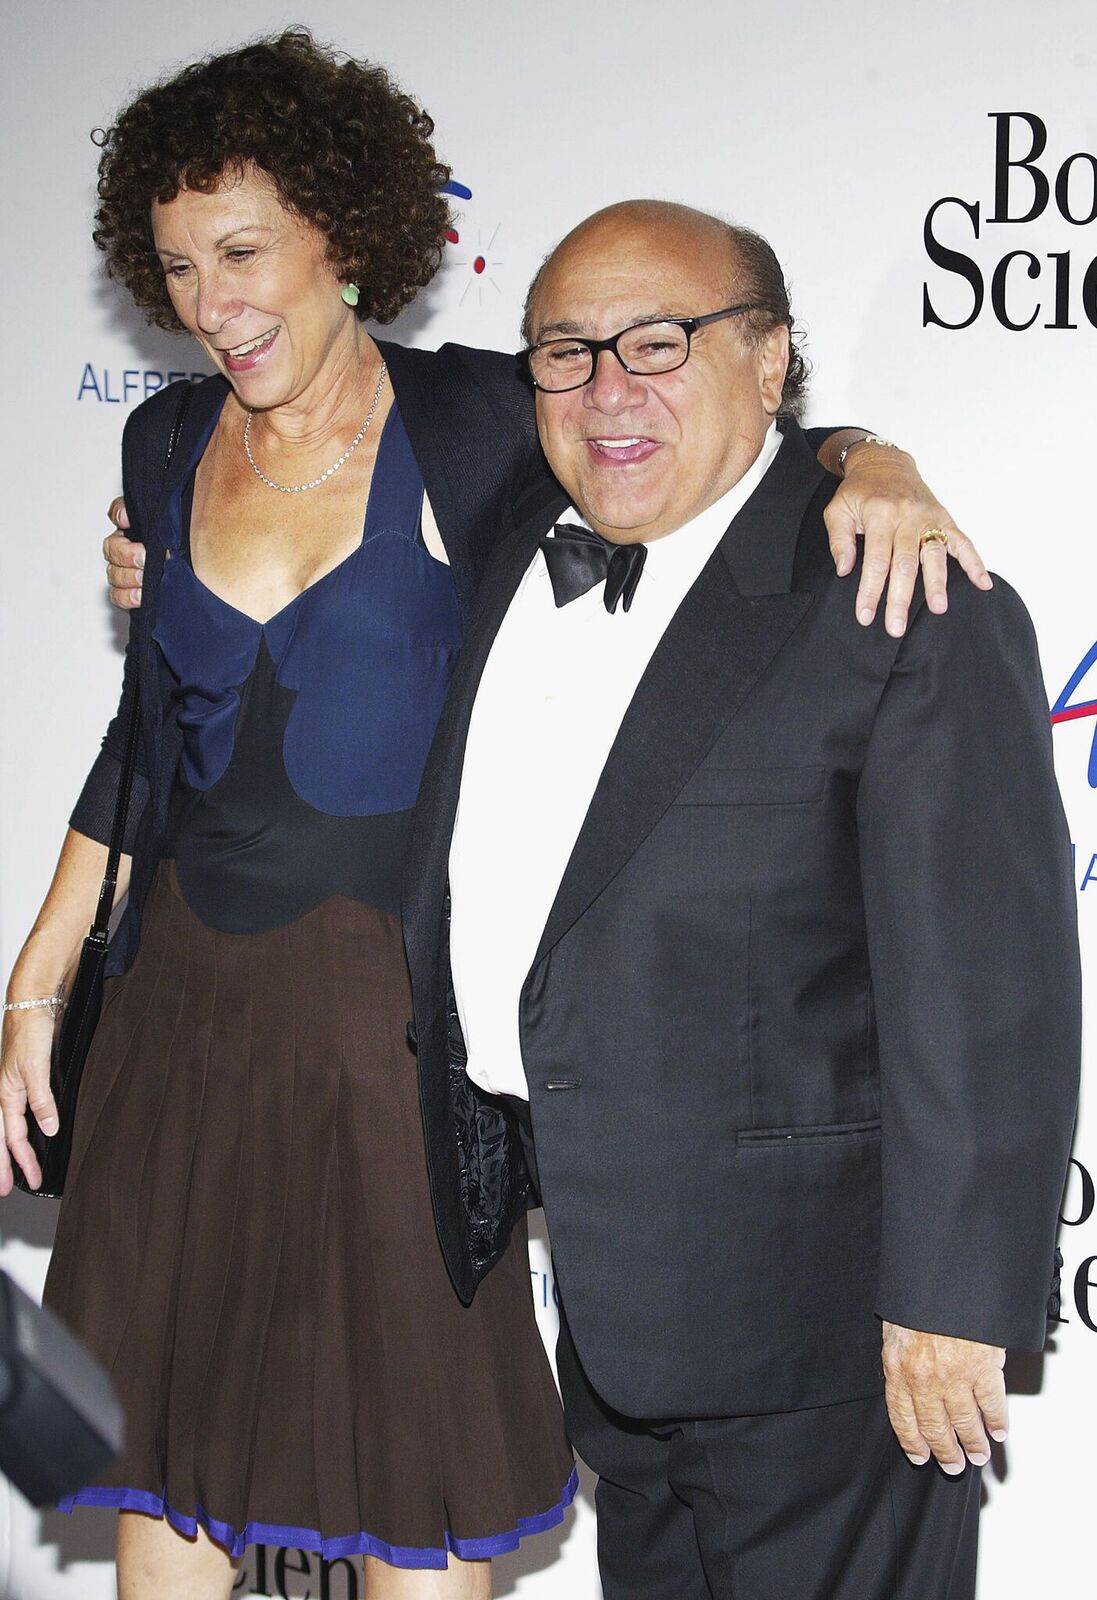 Rhea Perlman and Dannny Devito attend The Alfred Mann Foundation's Second Annual Evening of Innovation and Inspiration" honoring Larry King. | Source: Getty Images